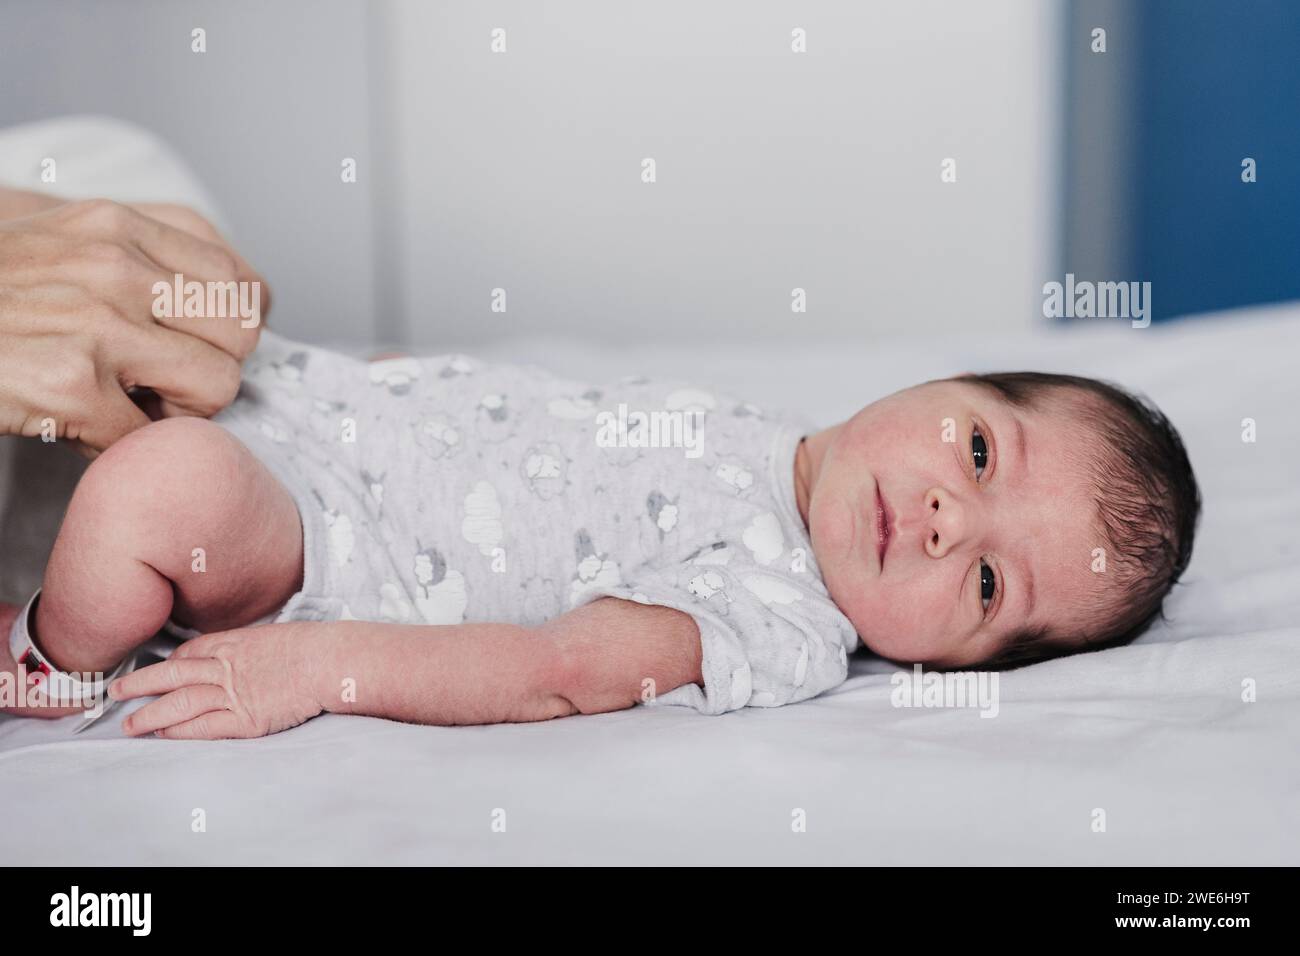 Cute baby girl lying on bed in hospital Stock Photo